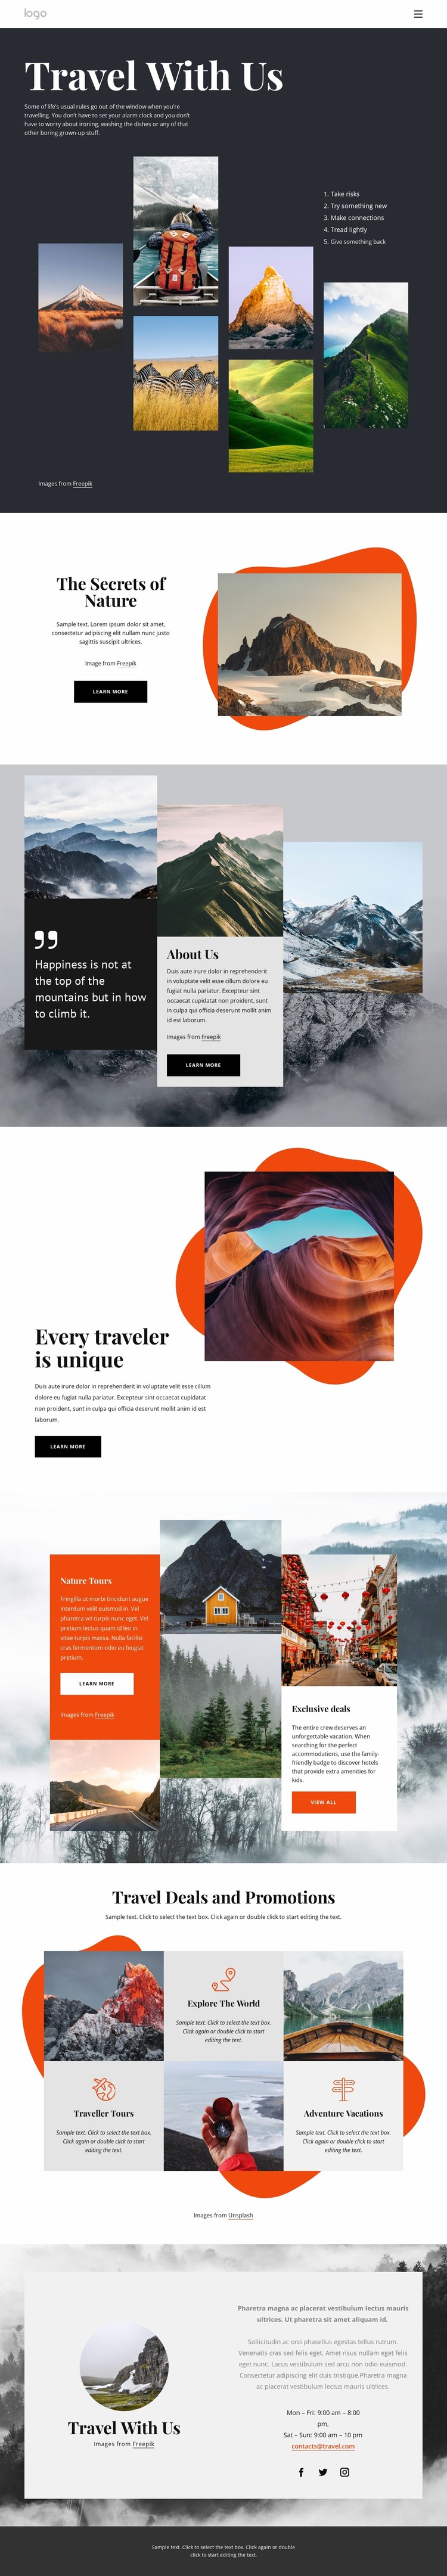 Local and specialized travel agency Website Mockup